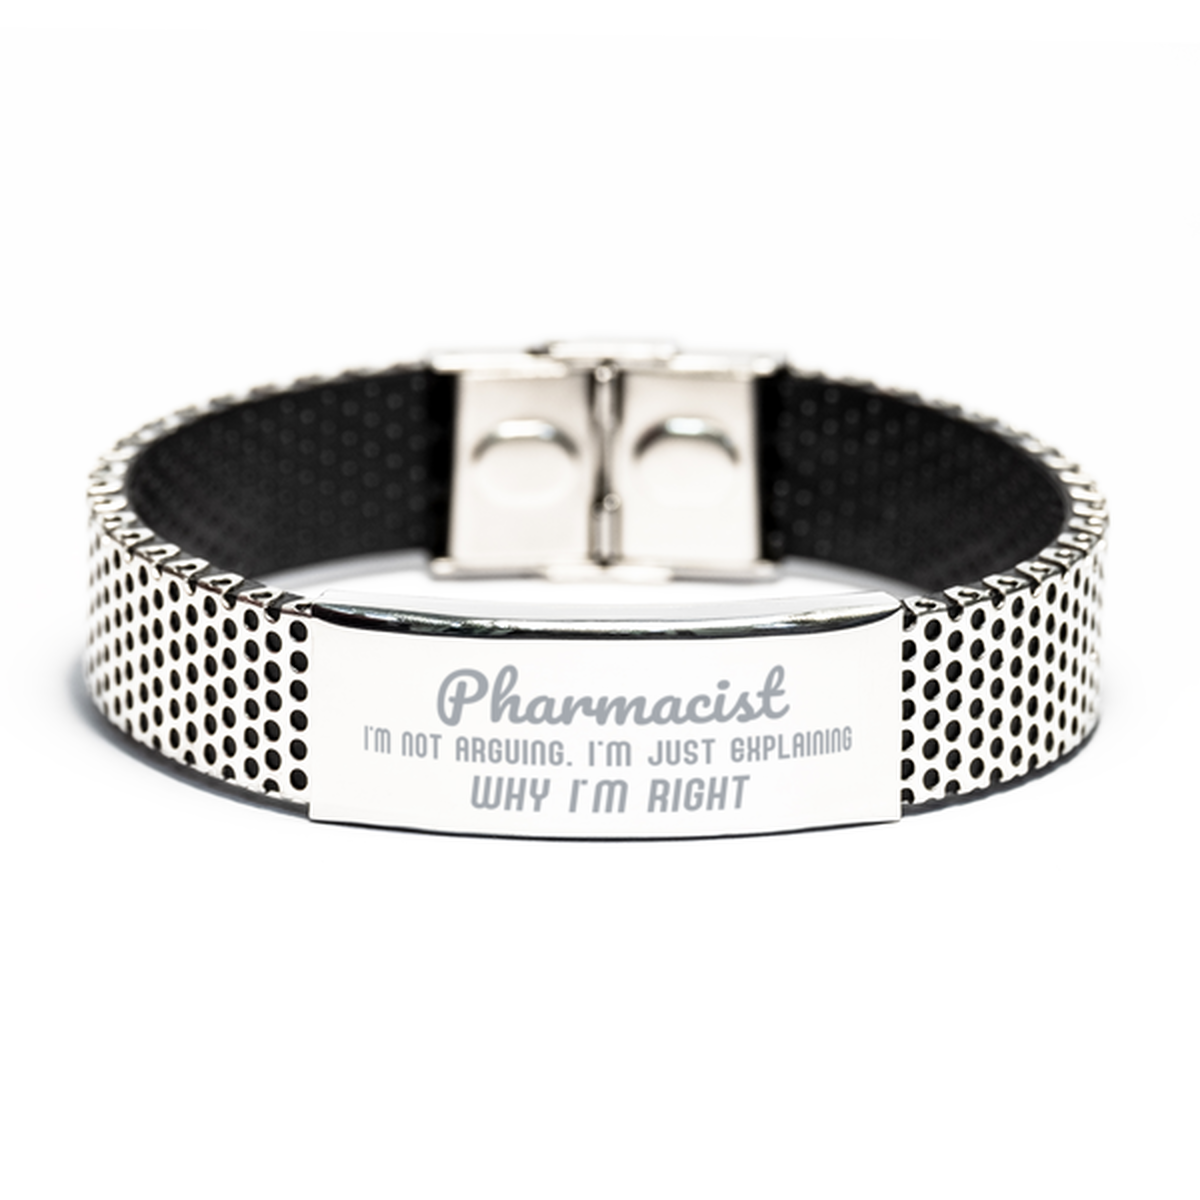 Pharmacist I'm not Arguing. I'm Just Explaining Why I'm RIGHT Stainless Steel Bracelet, Funny Saying Quote Pharmacist Gifts For Pharmacist Graduation Birthday Christmas Gifts for Men Women Coworker